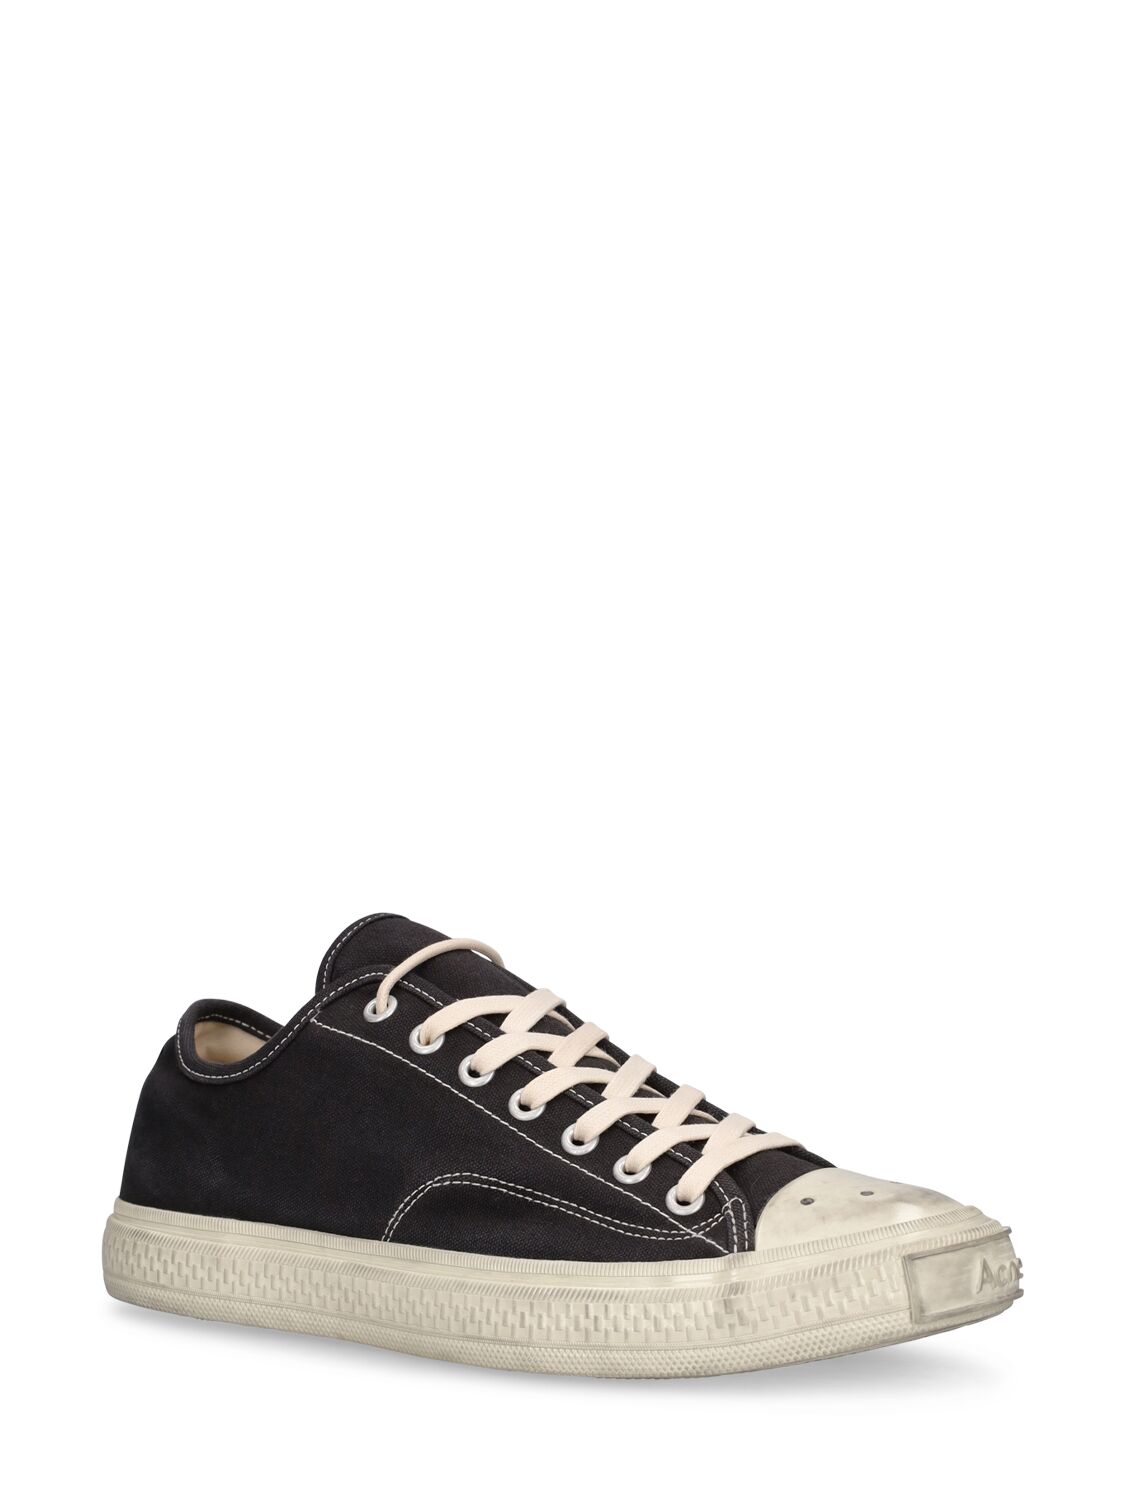 Shop Acne Studios Ballow Soft Tumbled Cotton Sneakers In Black,offwhite